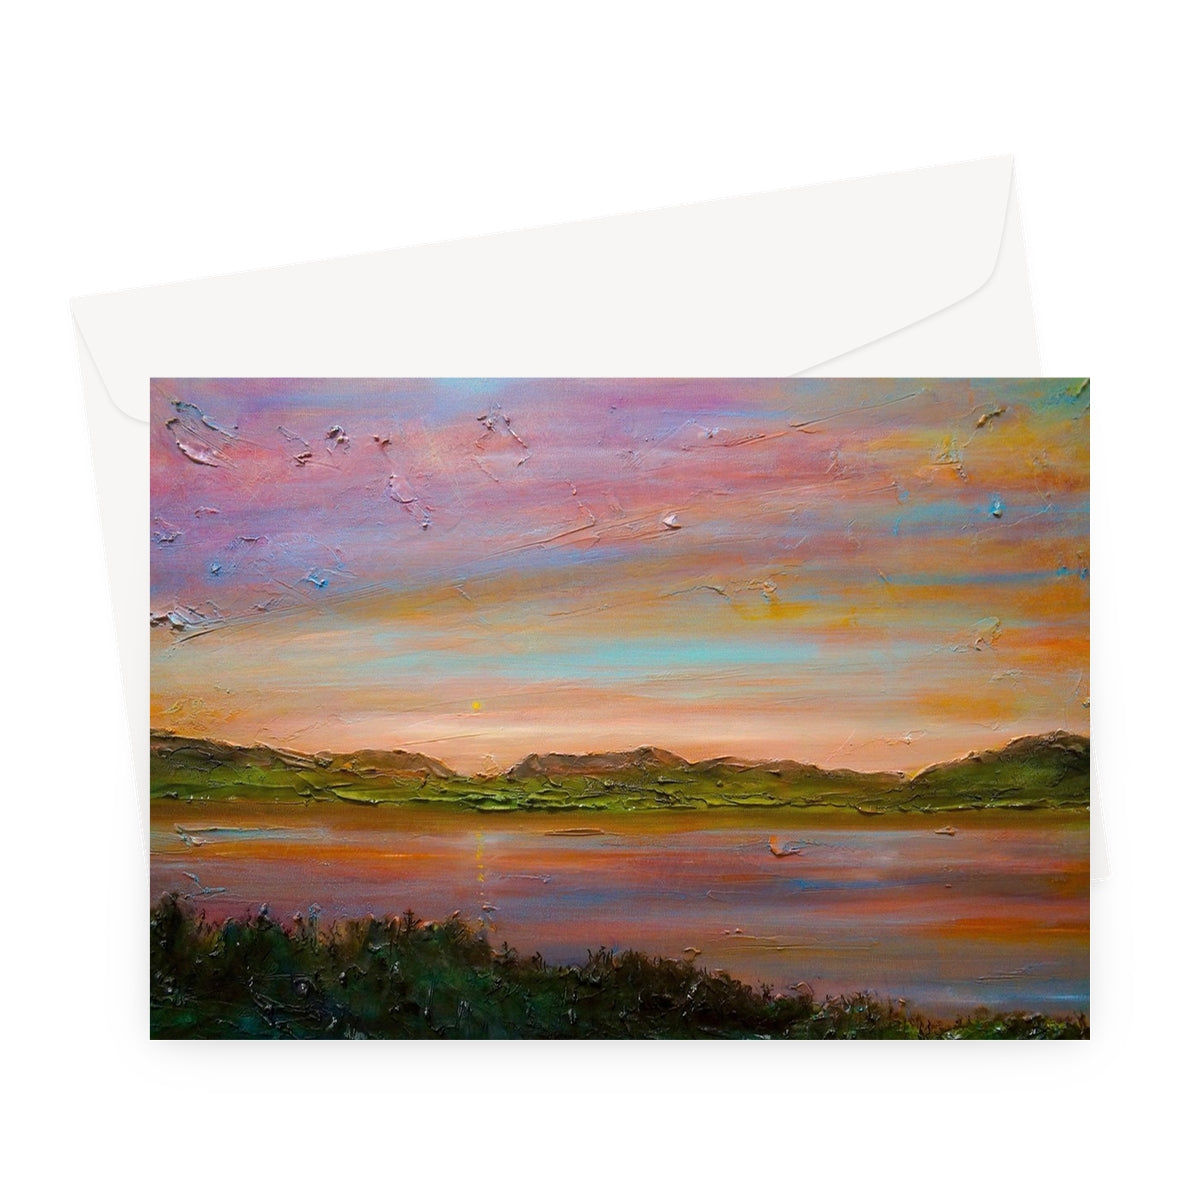 Gourock Golf Club Sunset Art Gifts Greeting Card-Stationery-River Clyde Art Gallery-A5 Landscape-1 Card-Paintings, Prints, Homeware, Art Gifts From Scotland By Scottish Artist Kevin Hunter